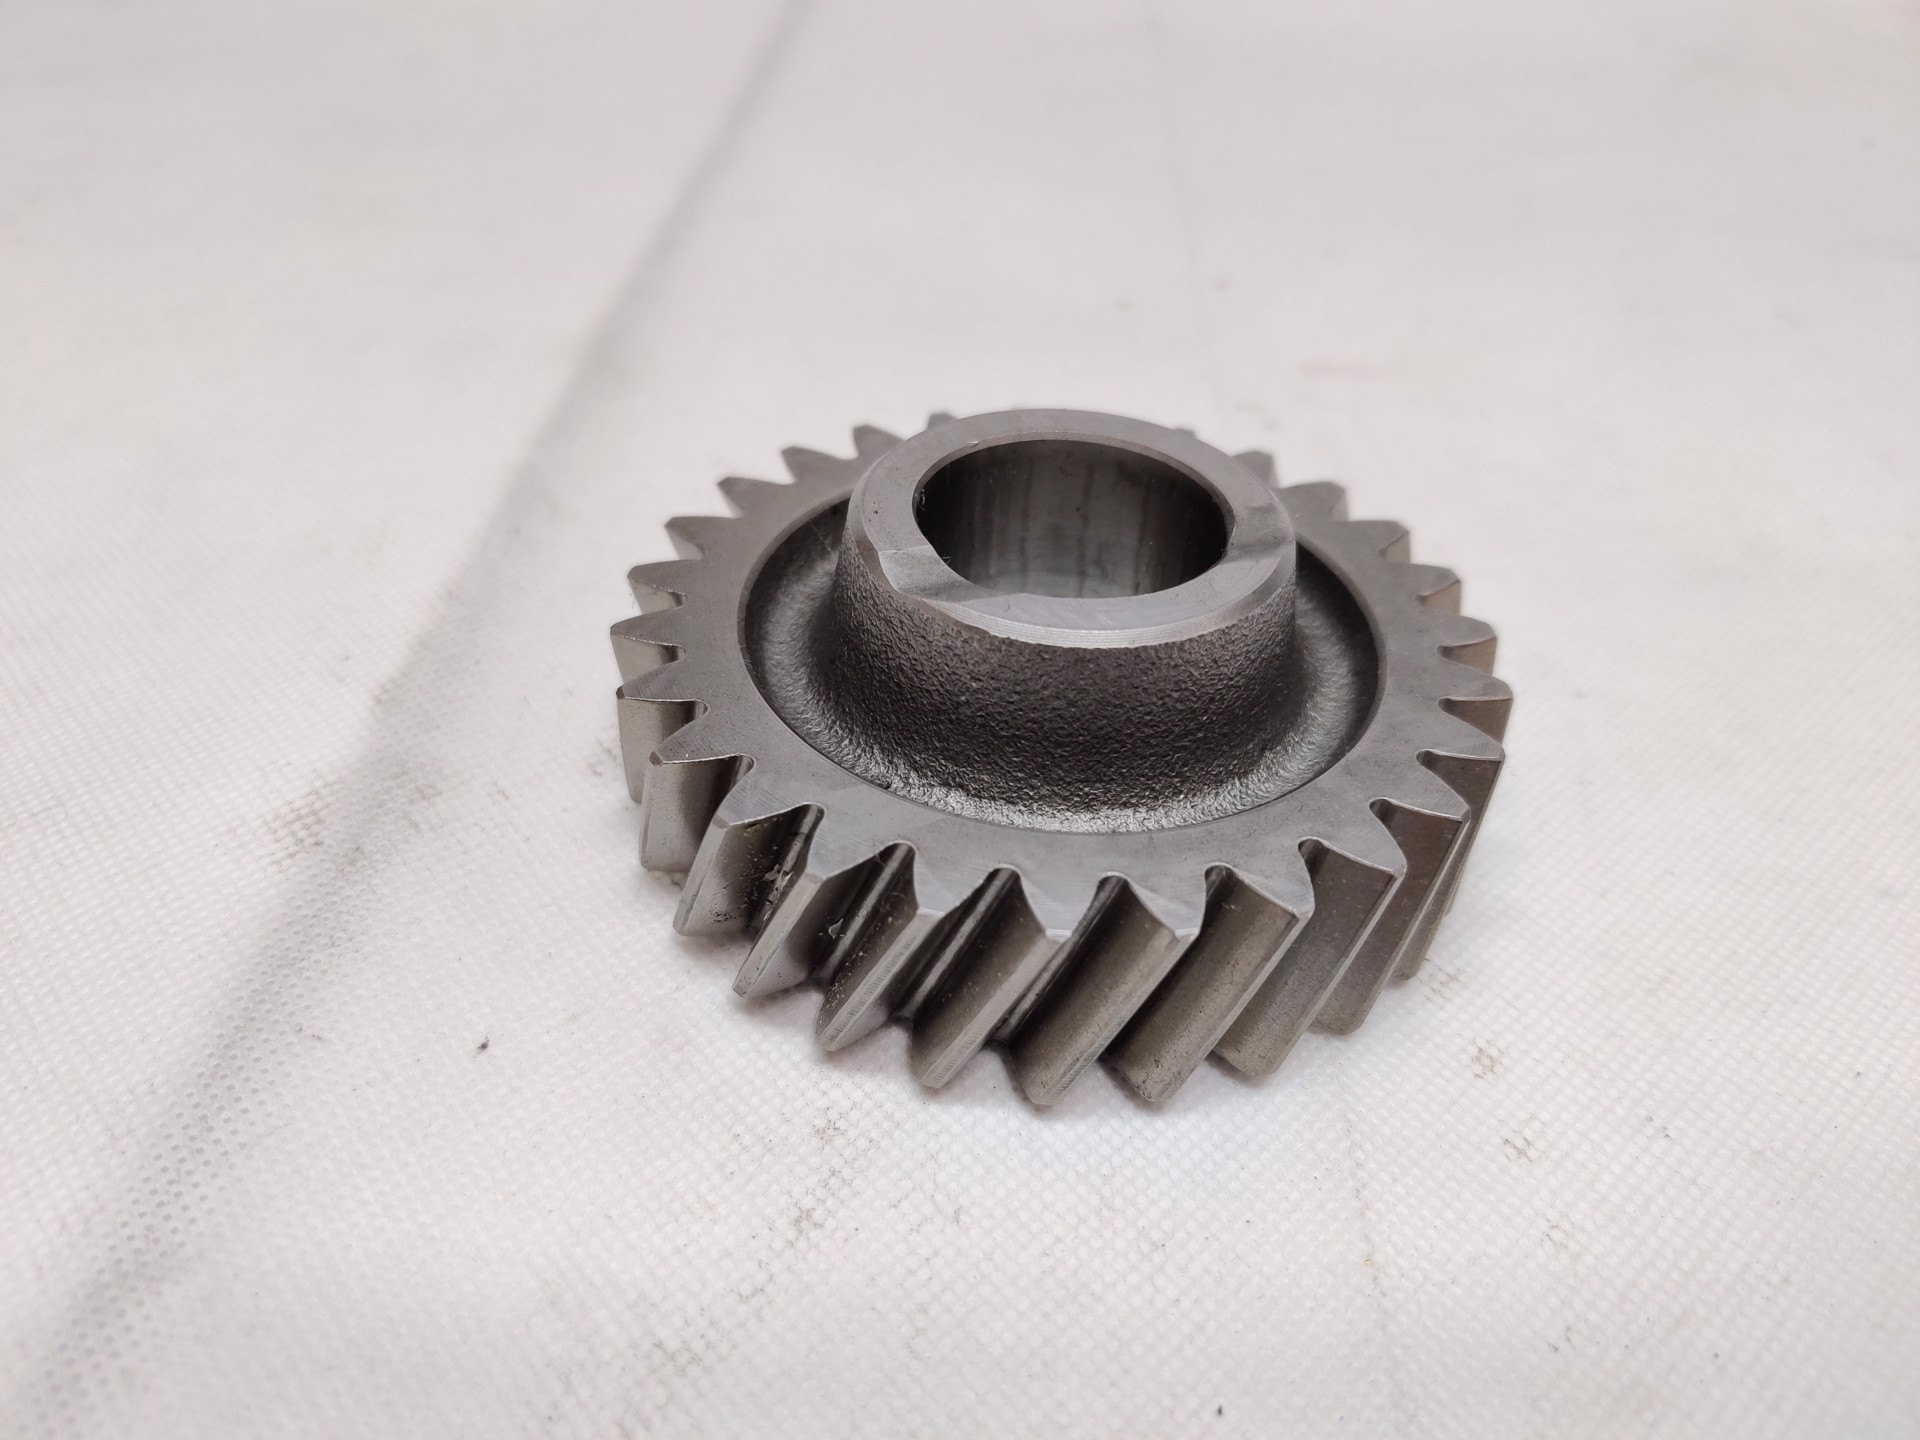 Picture of USED AWD Tranny Gear - 5-spd Reverse Idler Gear ONLY